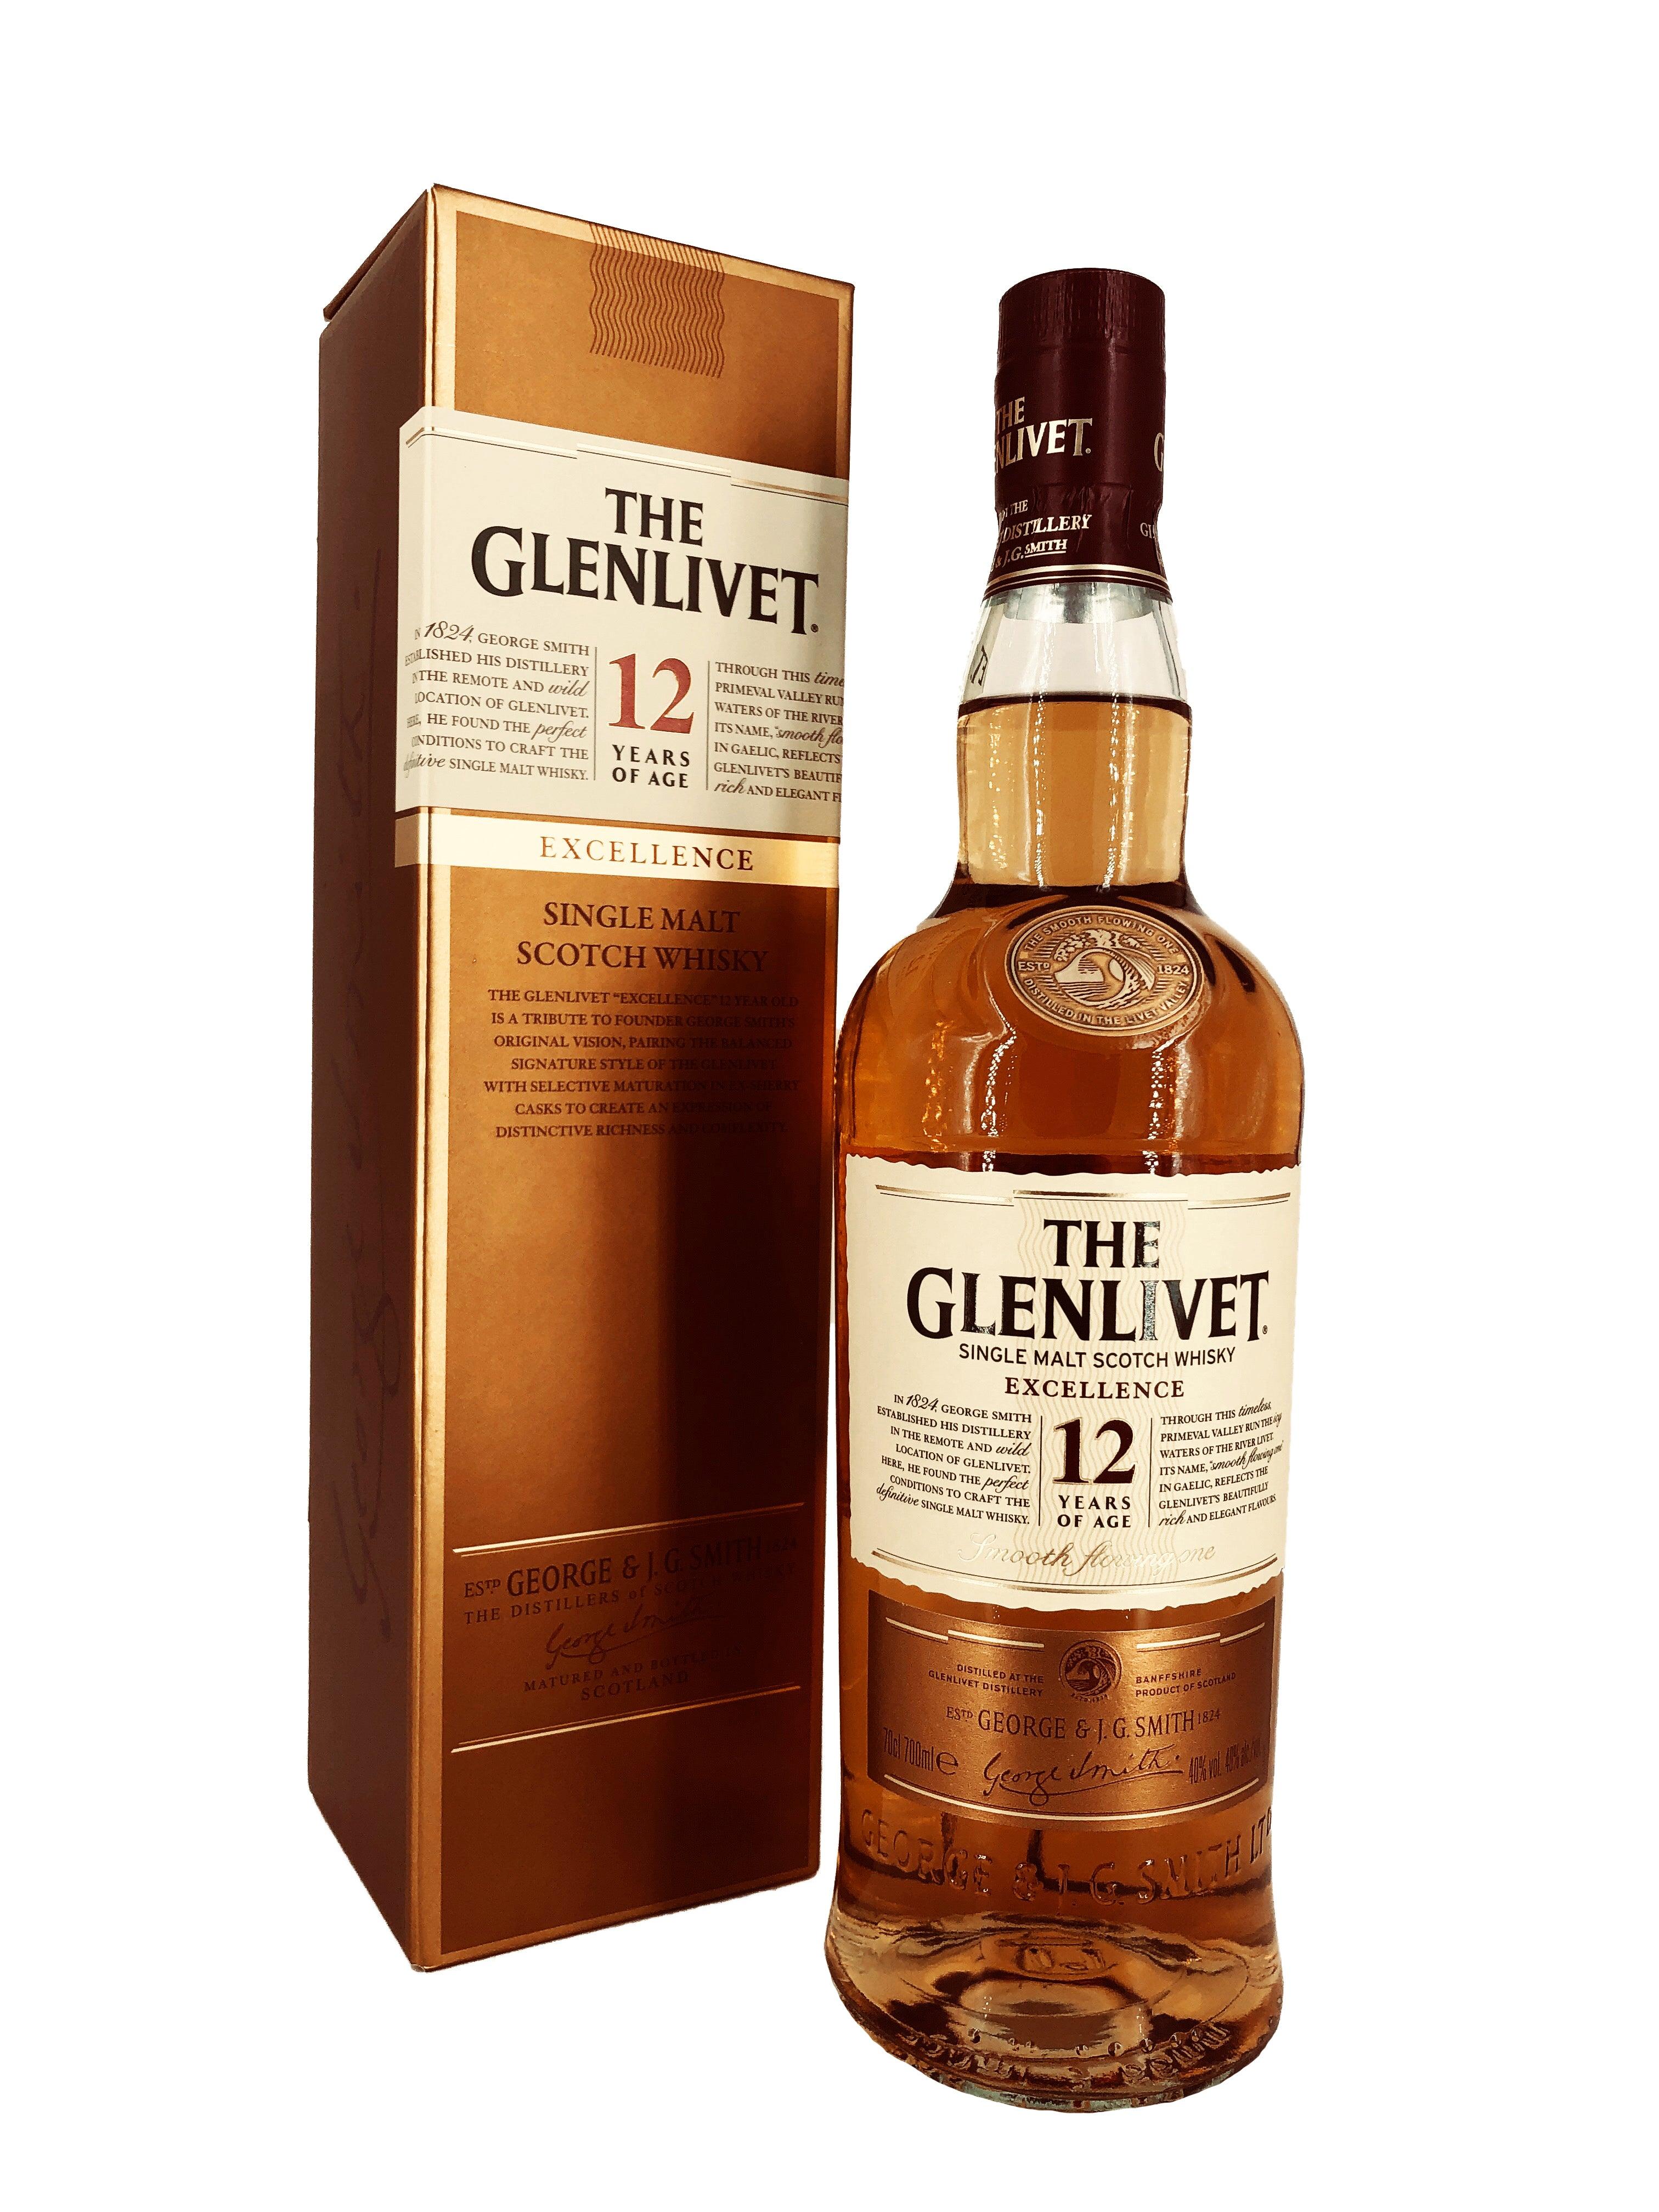 The Glenlivet 12 Year Old Excellence Single Malt Scotch Whisky - Double S Wine 